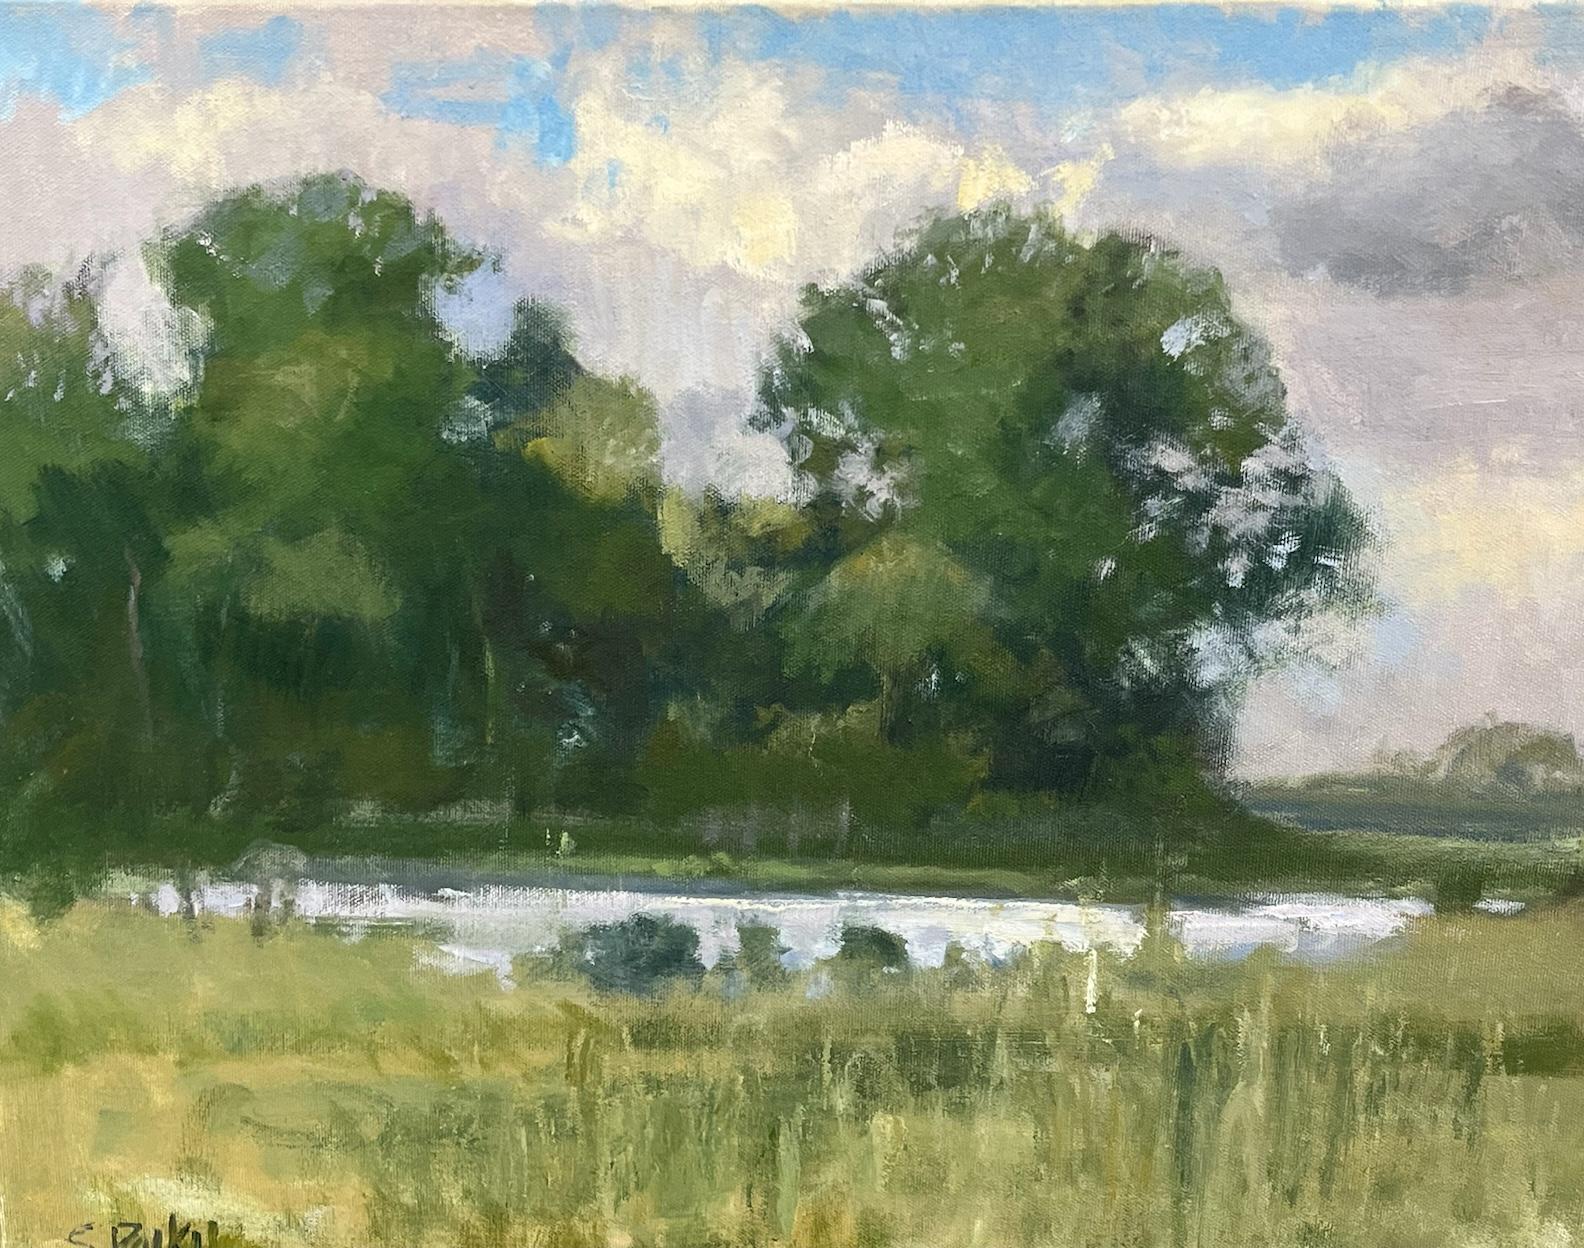 LOOK FOR FREE SHIPPING AT CHECKOUT  PRICE NEGOTIABLE
 George Ranch   is an impressionist landscape painting that was painted near Richmond TX which is about 30 miles from Houston.  George Ranch Trees is a contemporary oil landscape painting on